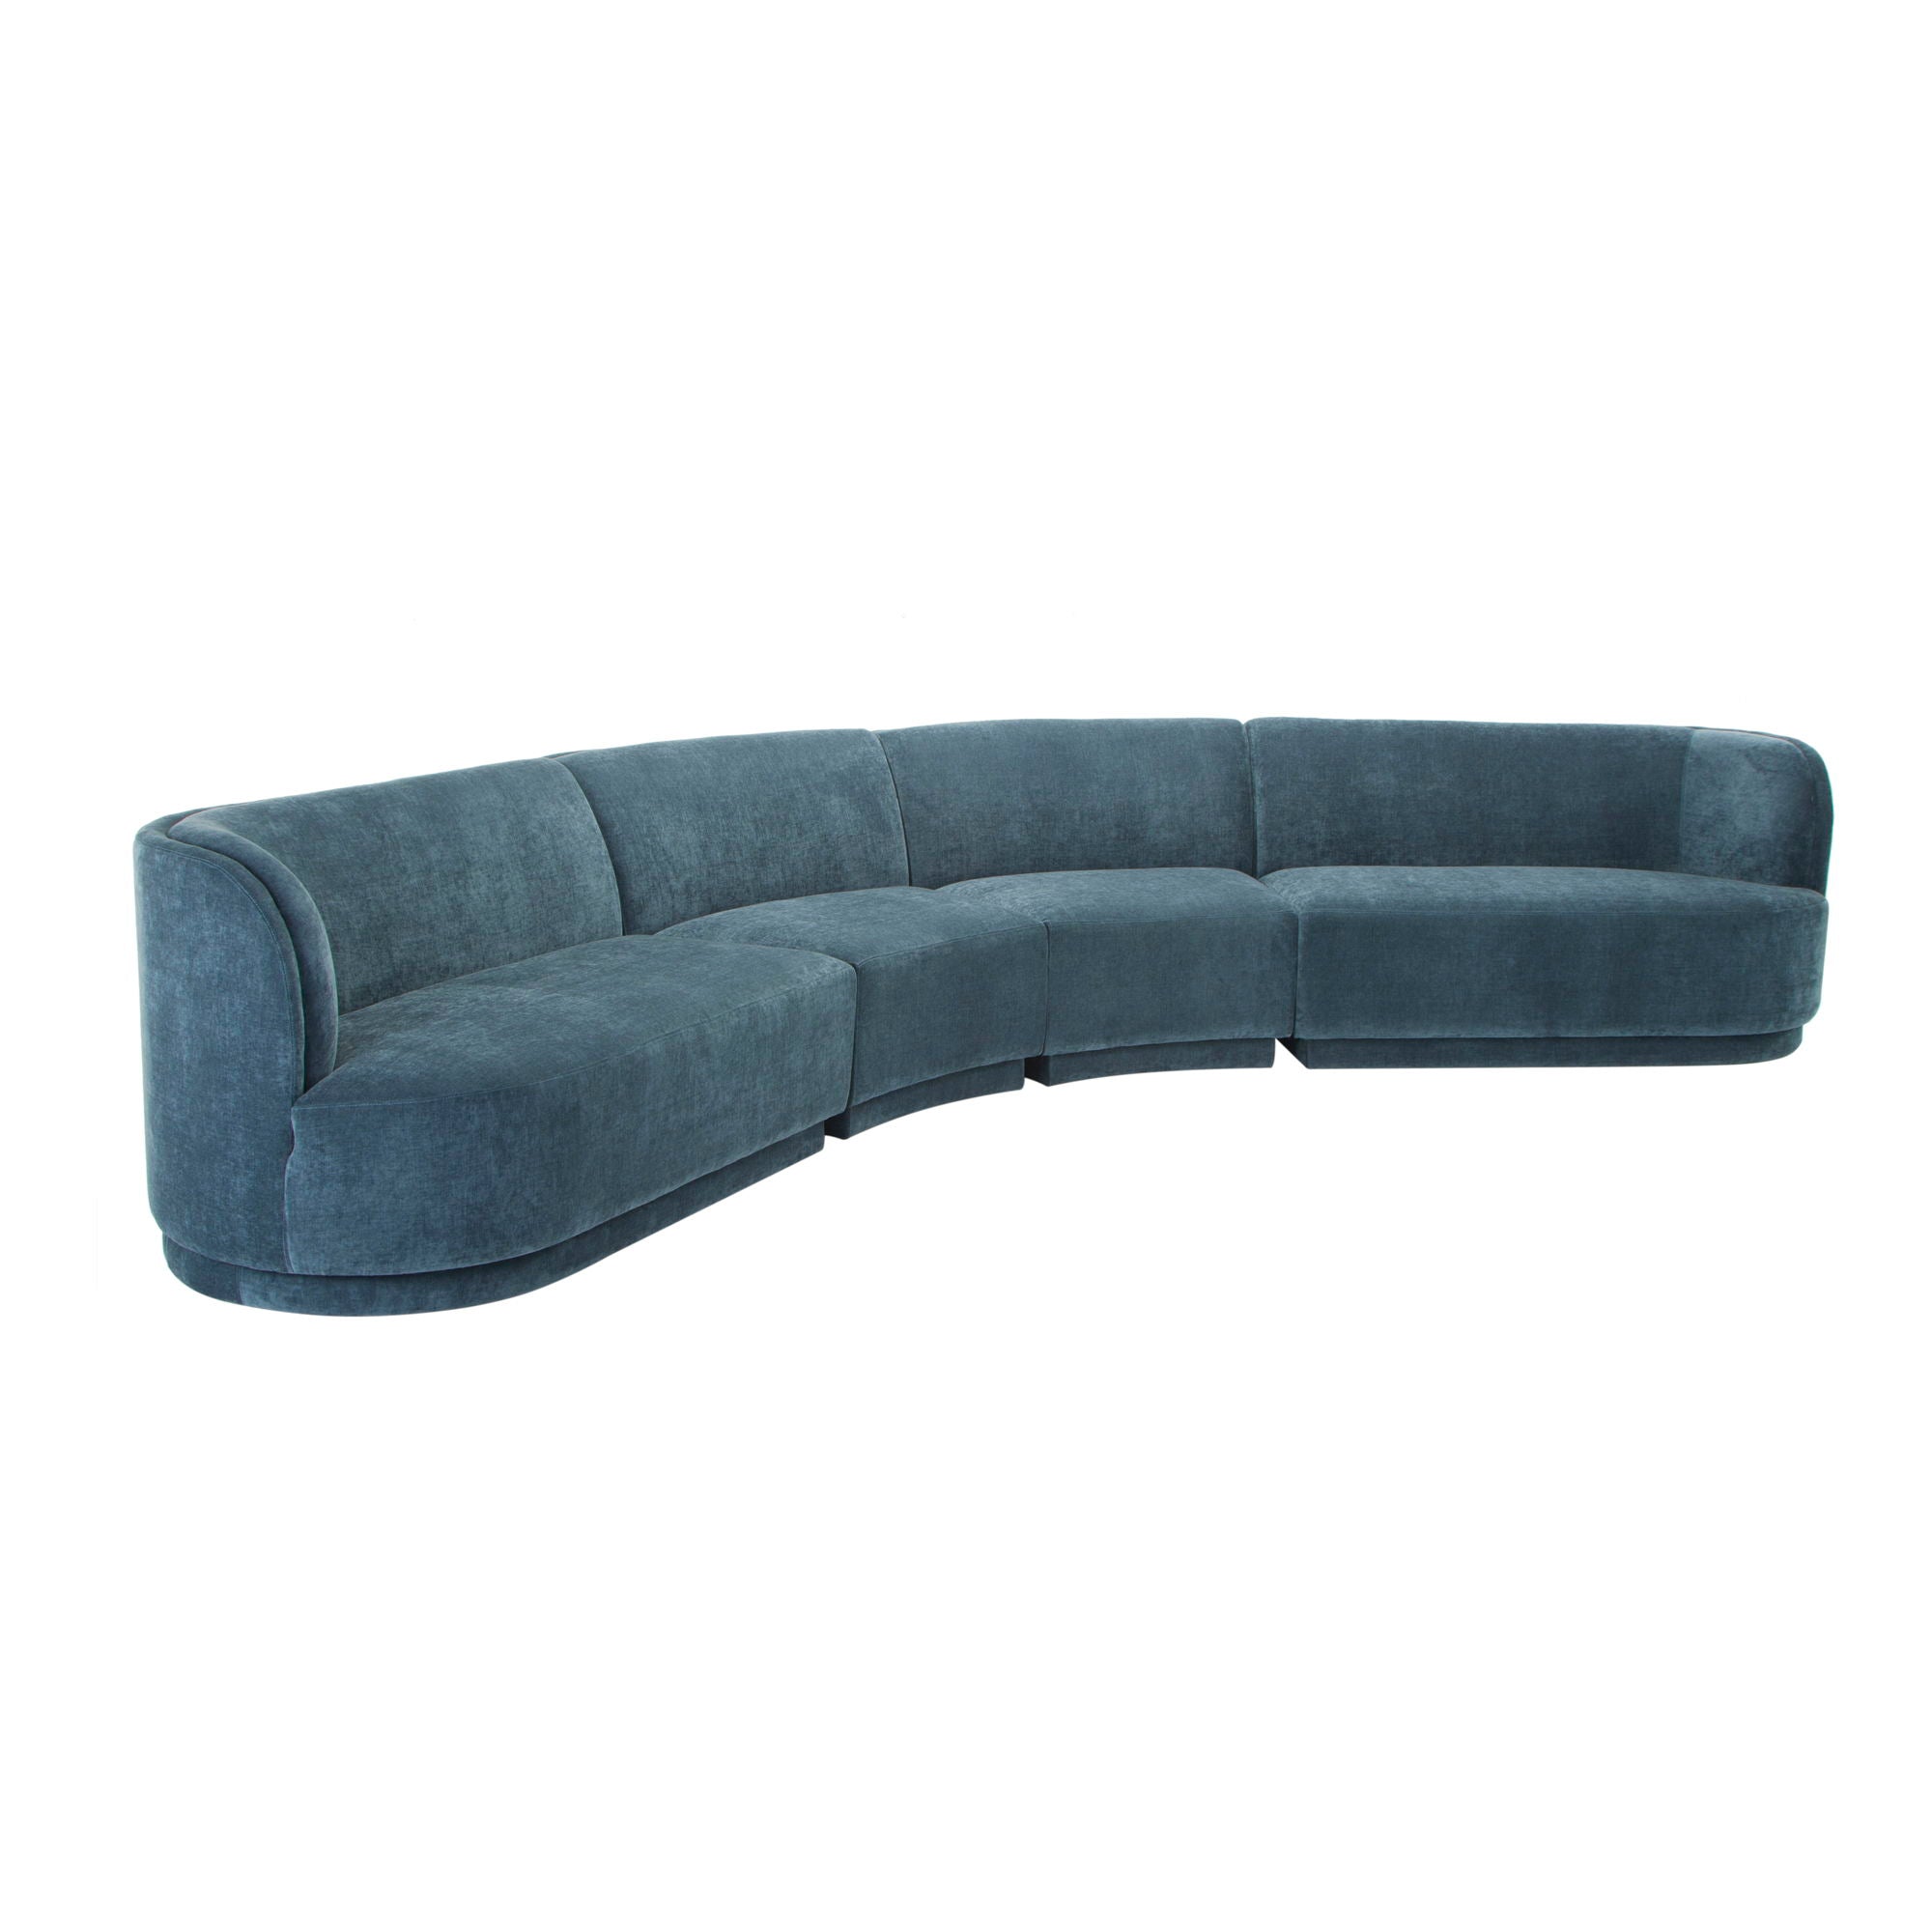 Yoon - Eclipse Modular Sectional Right-Facing Chaise - Blue-Stationary Sectionals-American Furniture Outlet